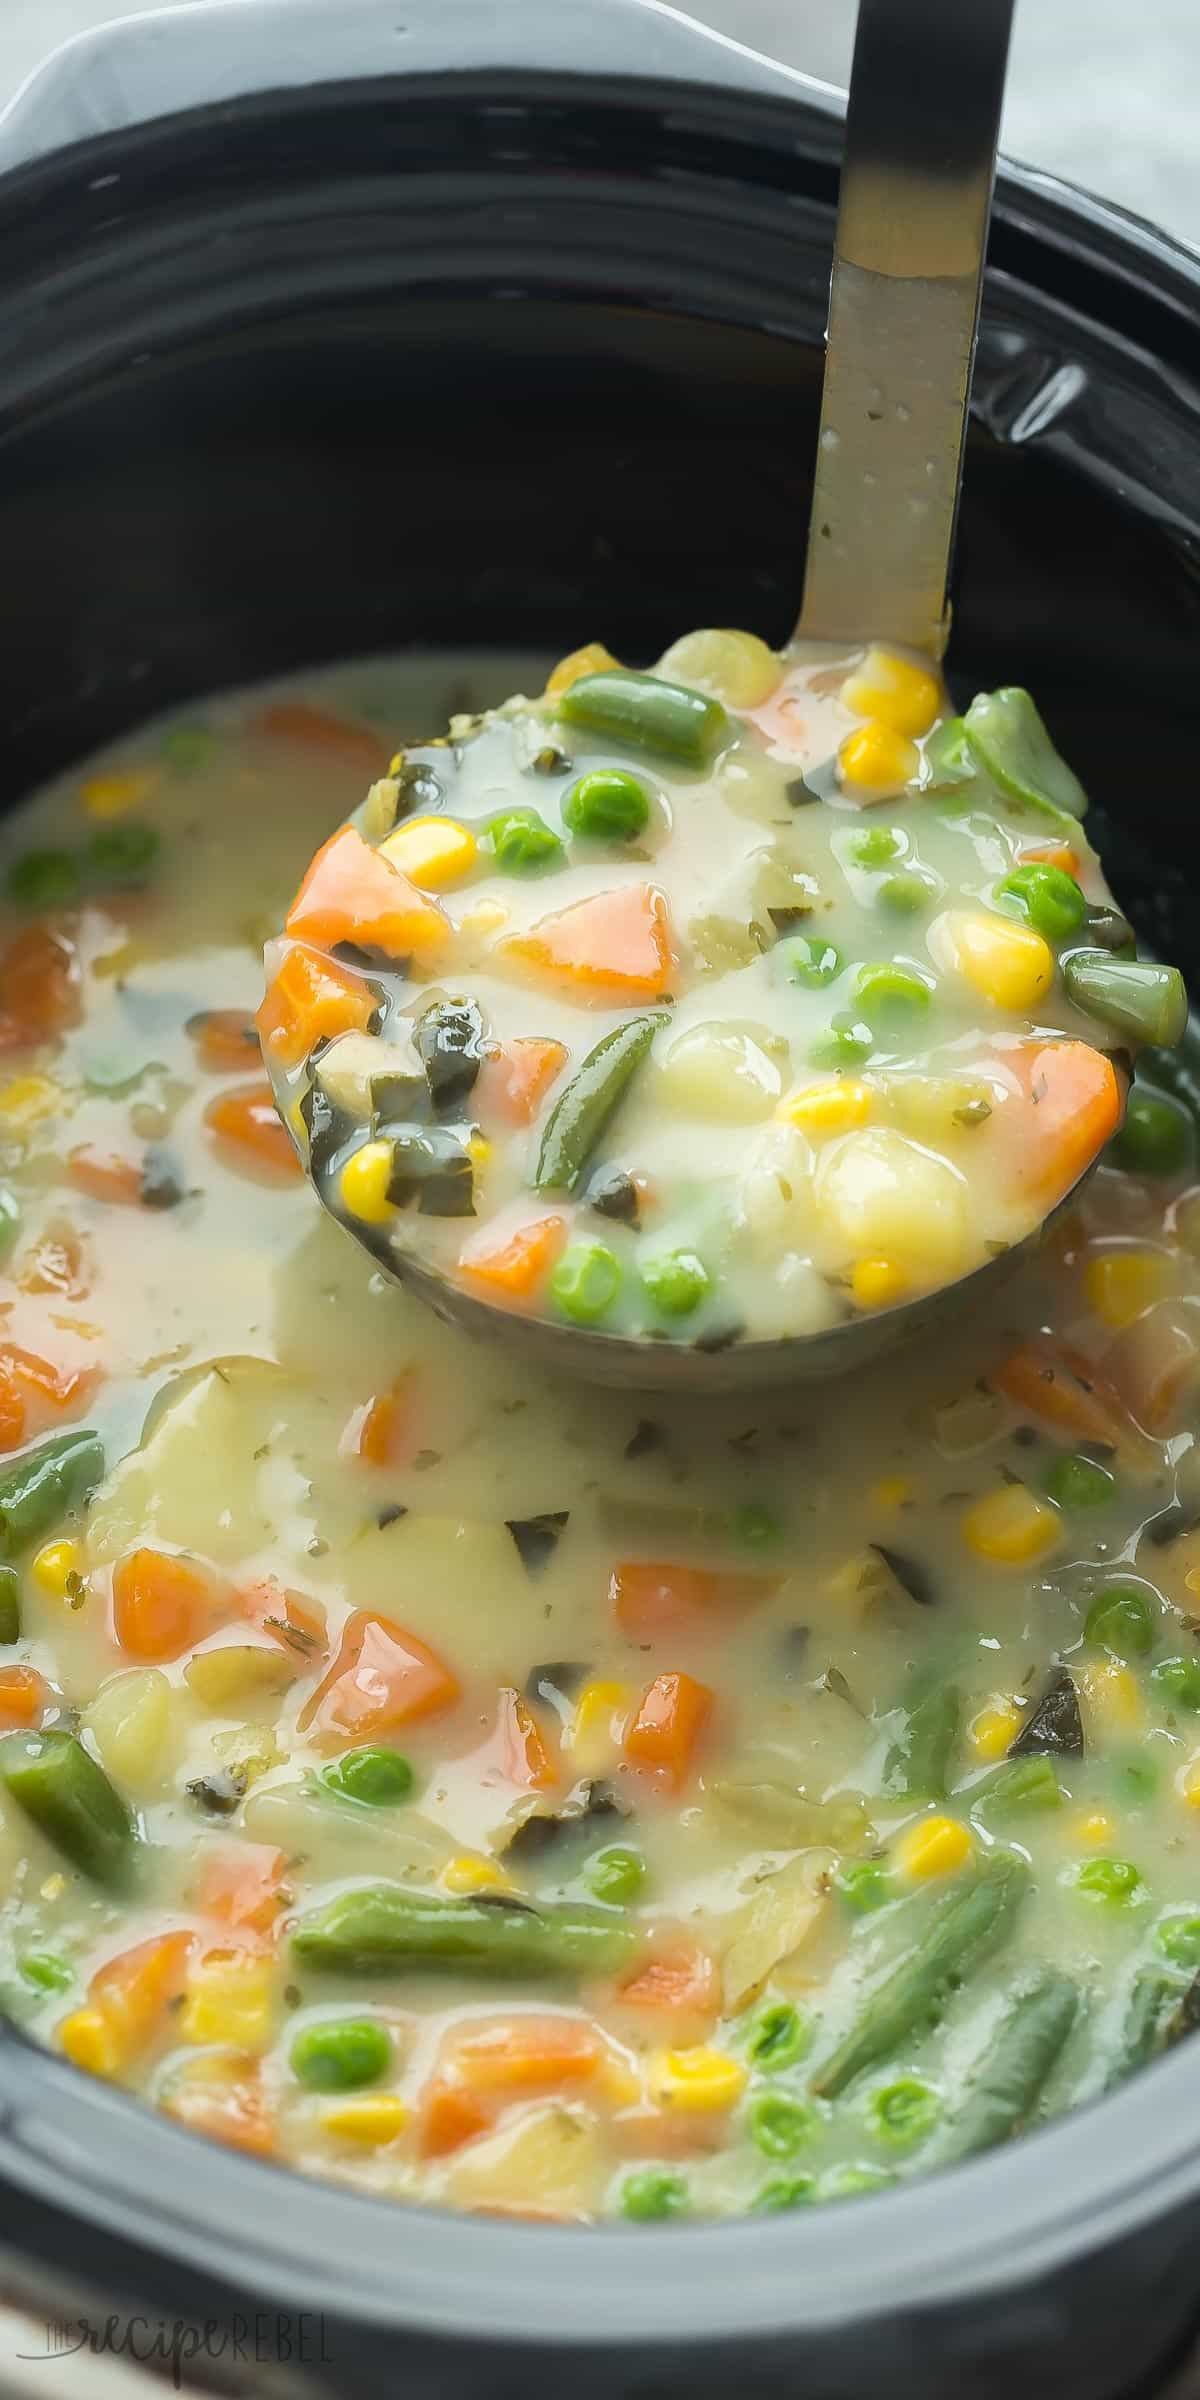 Crockpot Vegetarian Recipes
 Slow Cooker Creamy Ve able Soup with RECIPE VIDEO